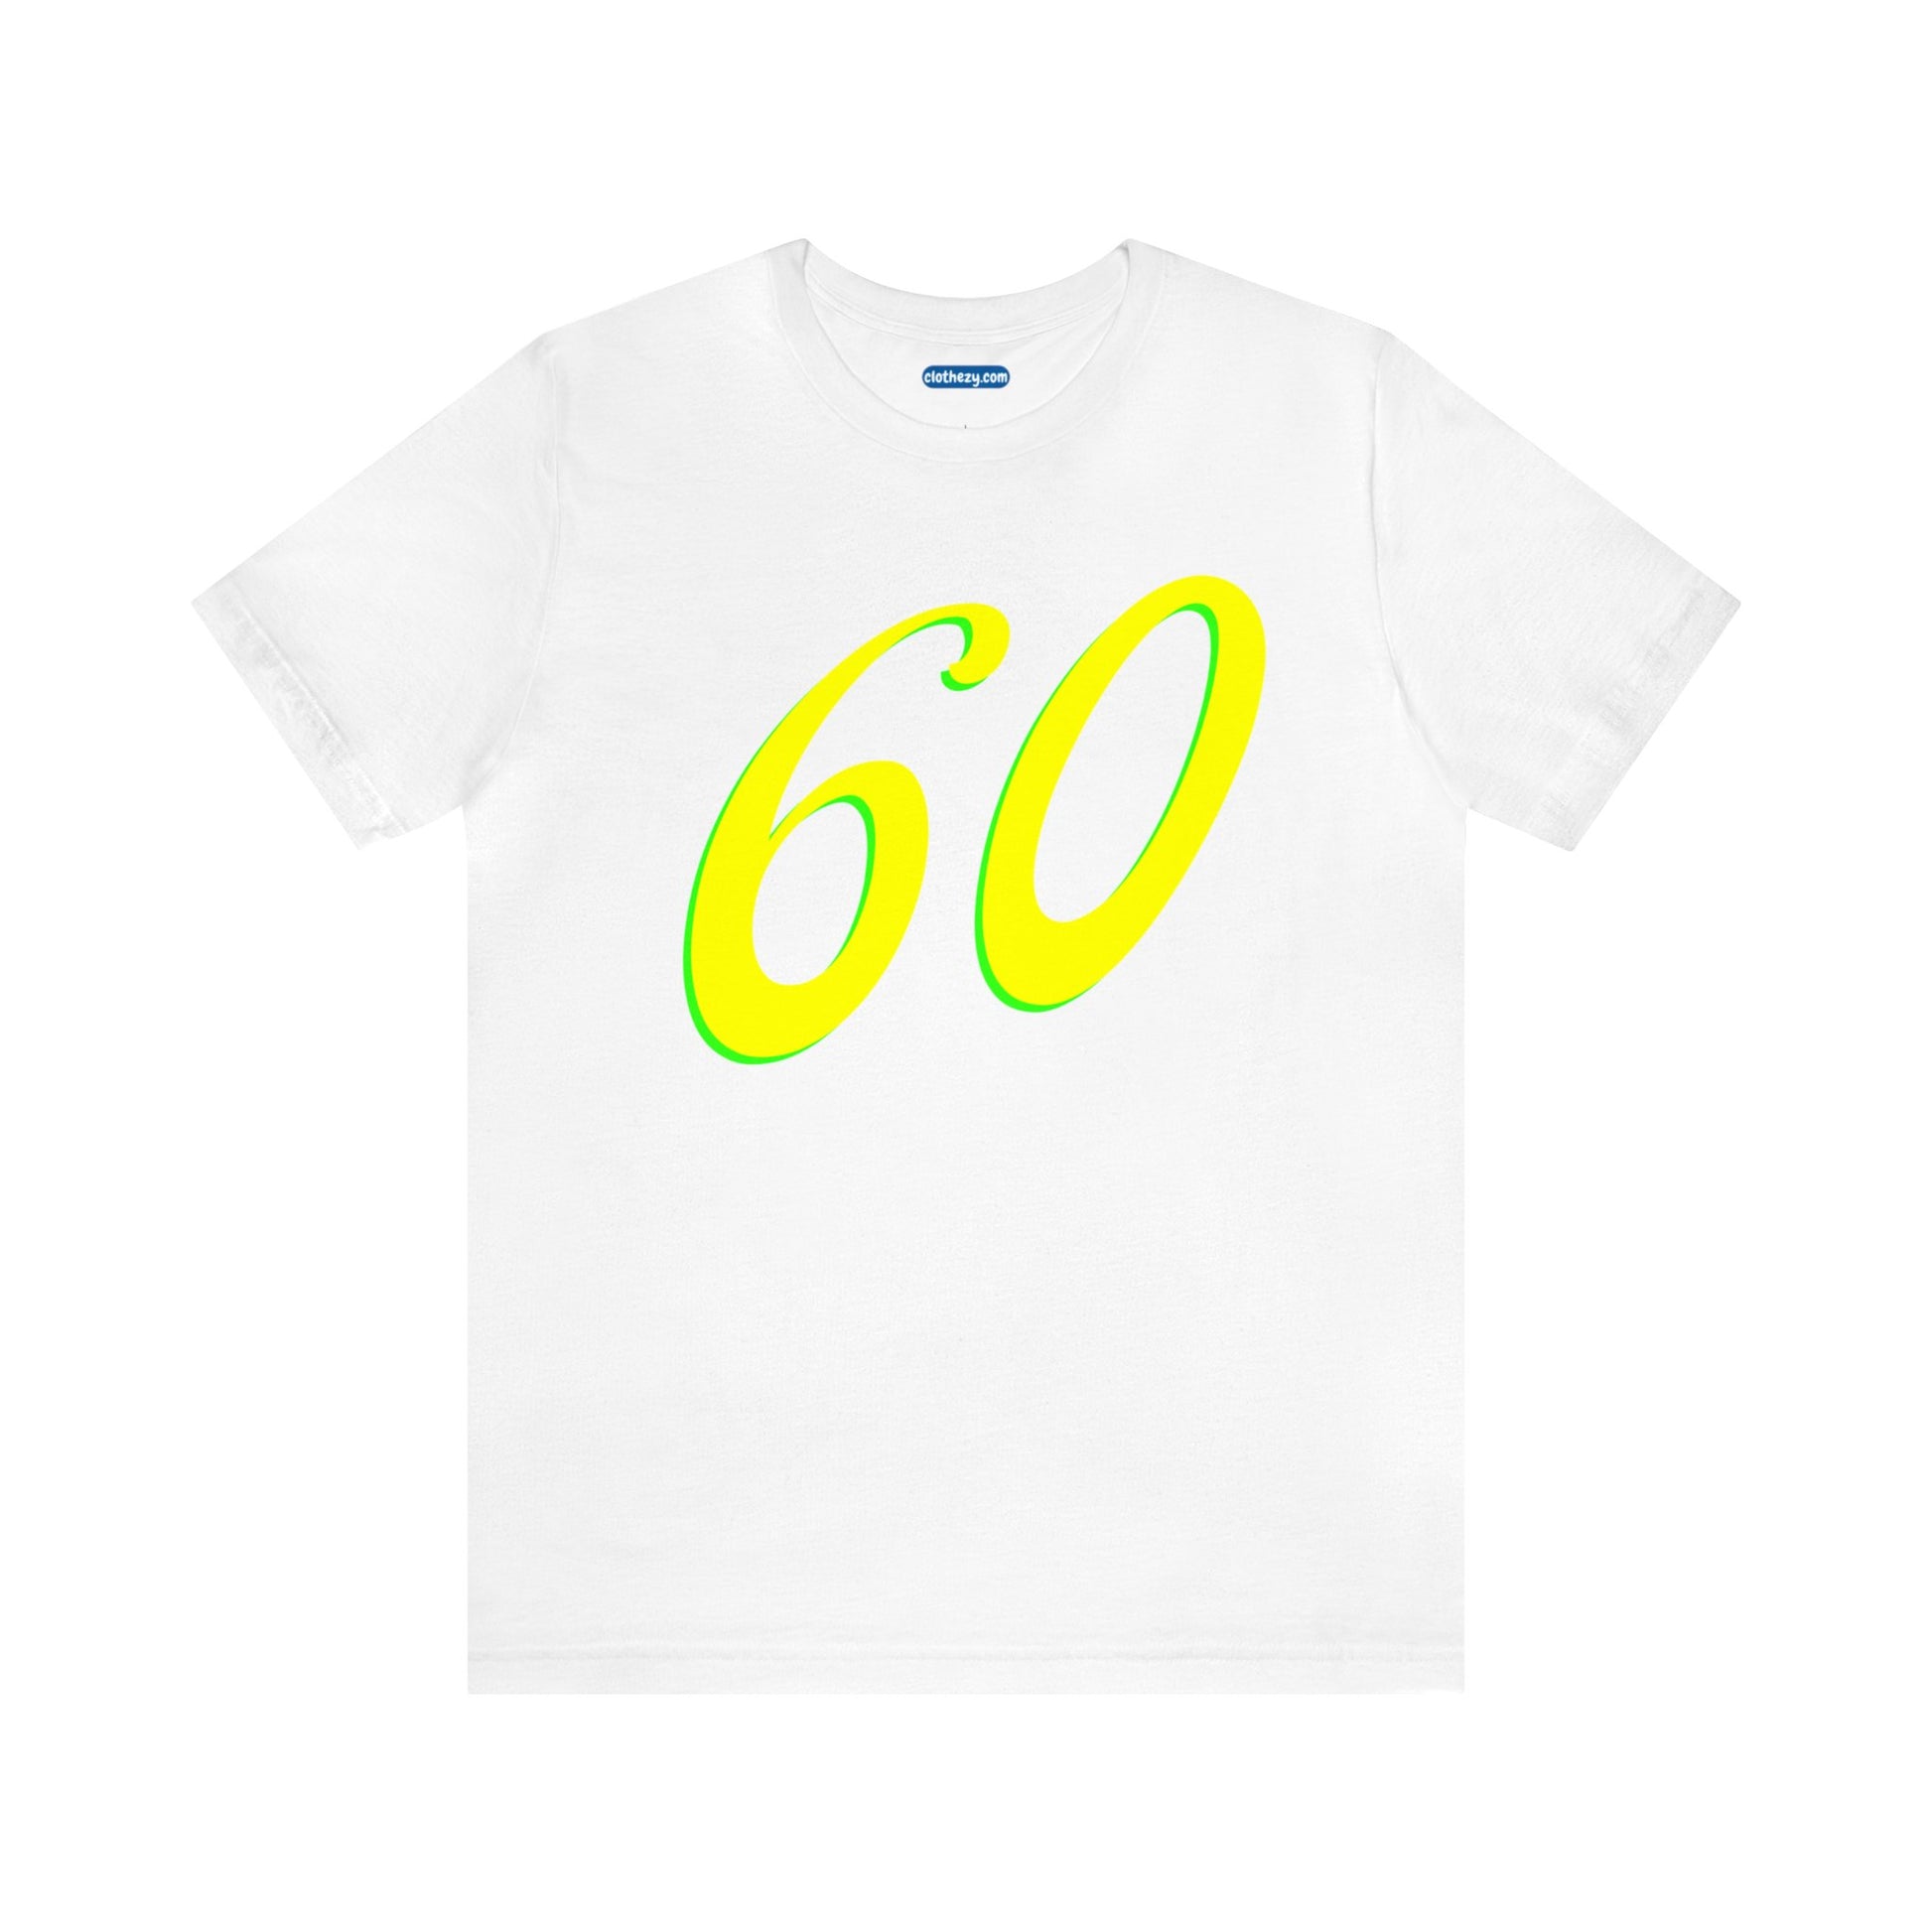 Number 60 Design - Soft Cotton Tee for birthdays and celebrations, Gift for friends and family, Multiple Options by clothezy.com in White Size Small - Buy Now